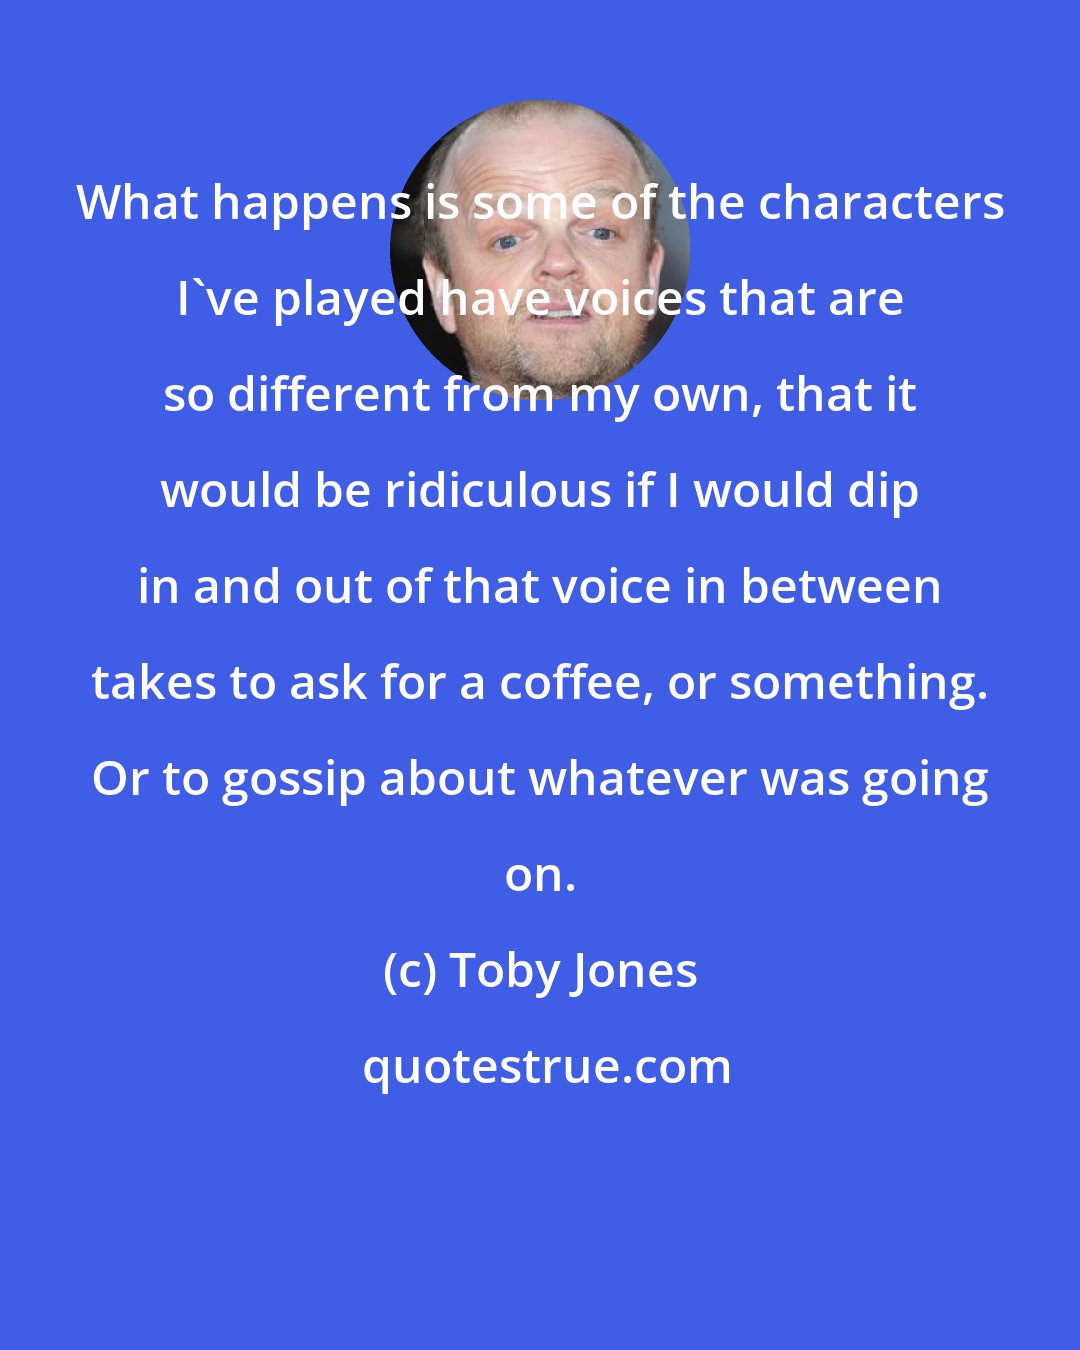 Toby Jones: What happens is some of the characters I've played have voices that are so different from my own, that it would be ridiculous if I would dip in and out of that voice in between takes to ask for a coffee, or something. Or to gossip about whatever was going on.